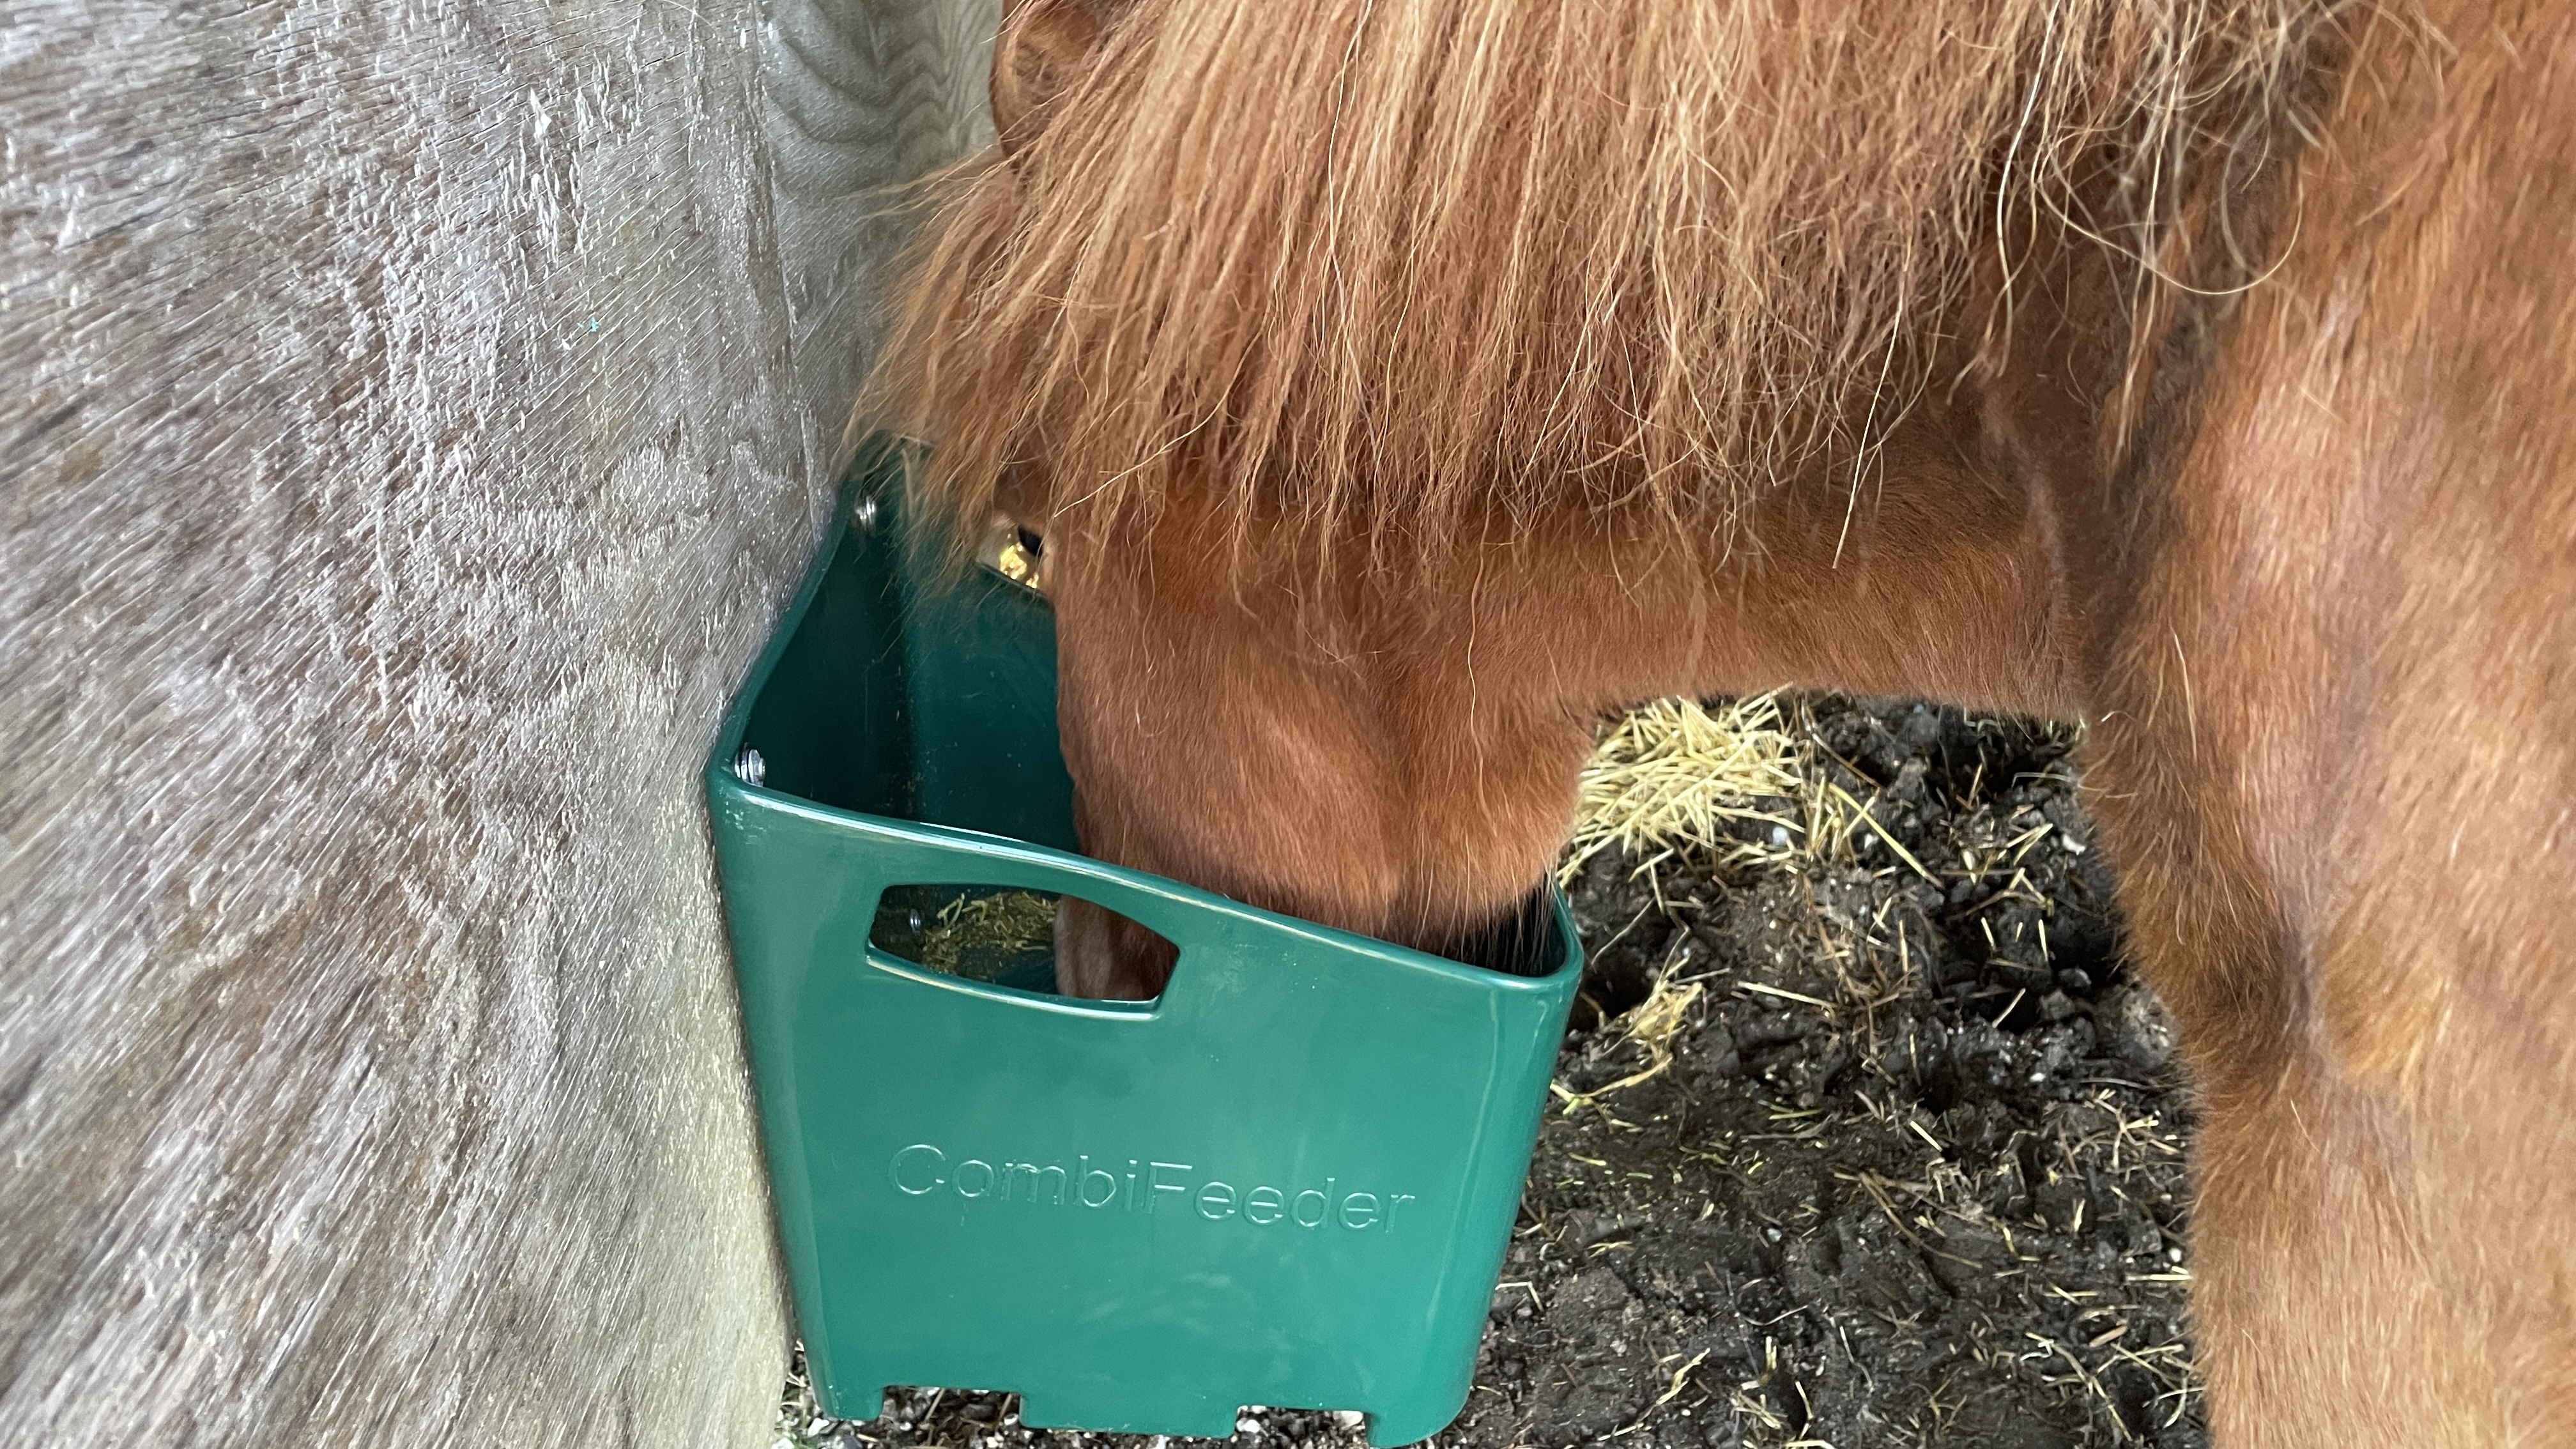 Use the CombiFeeder trough for feeding horses in the paddock or use it as a trough mounted on the wall inside the horse stable